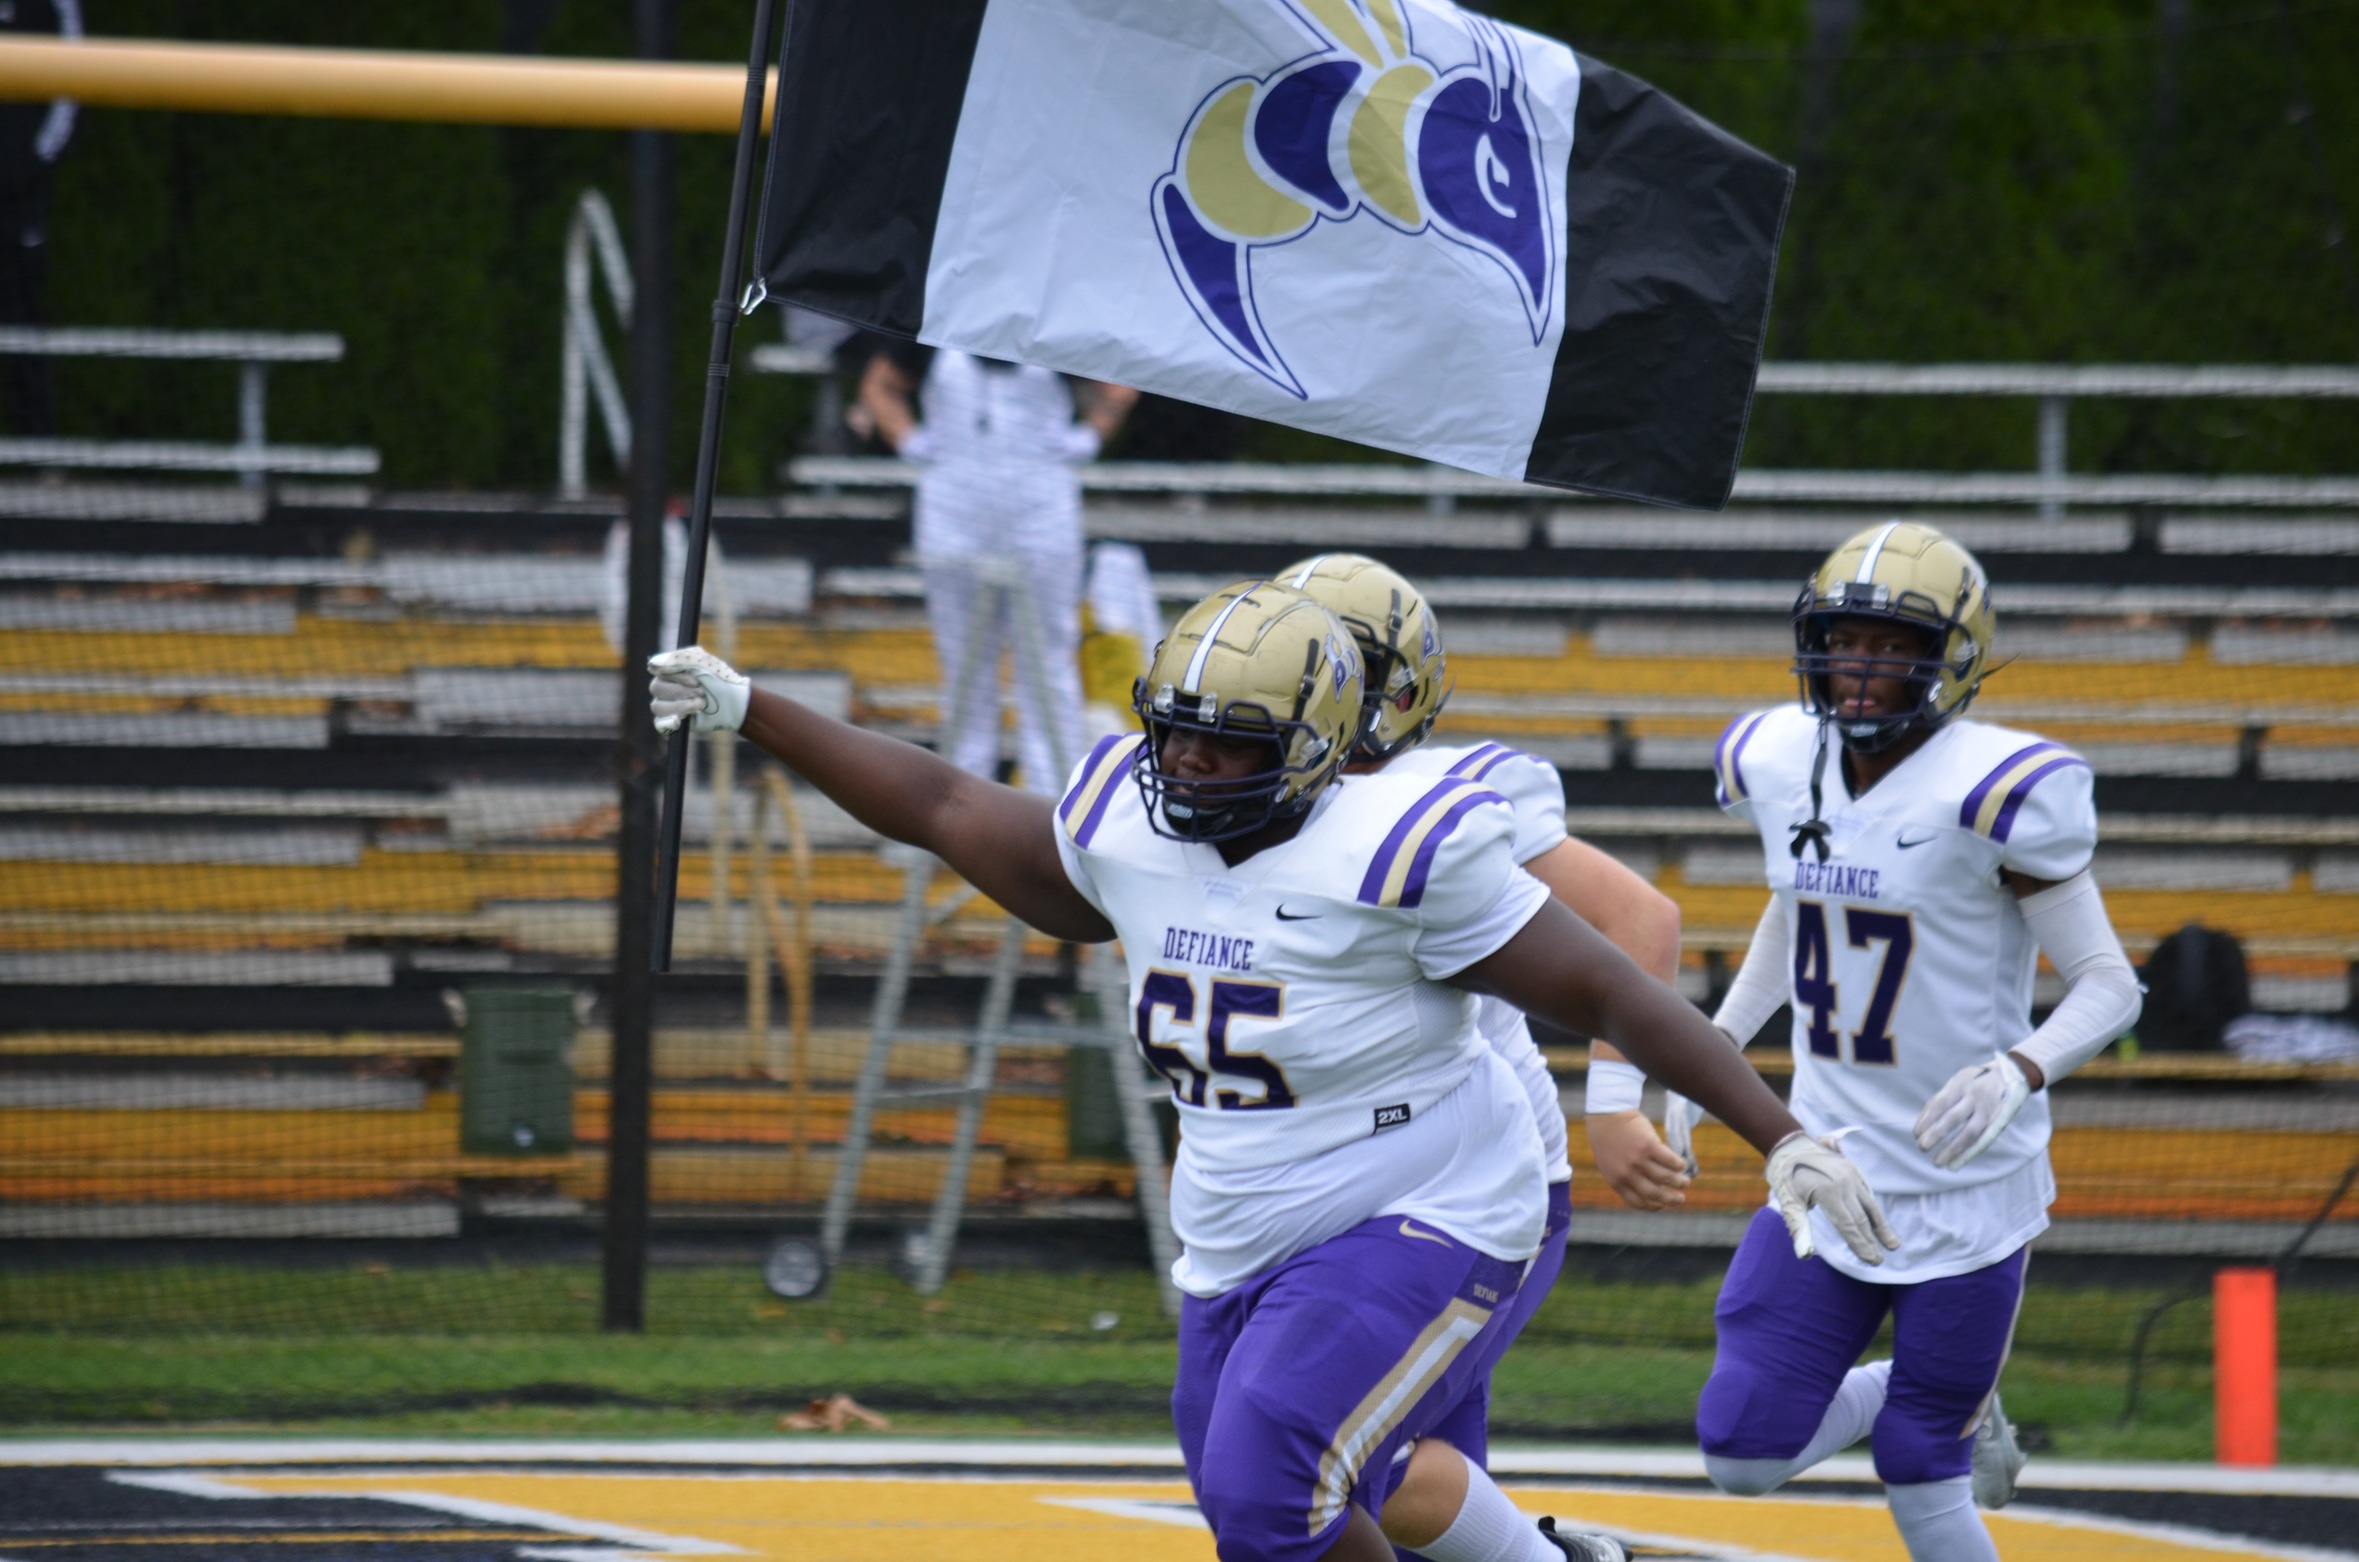 FB Preview: Jackets travel to winless Anderson on Saturday